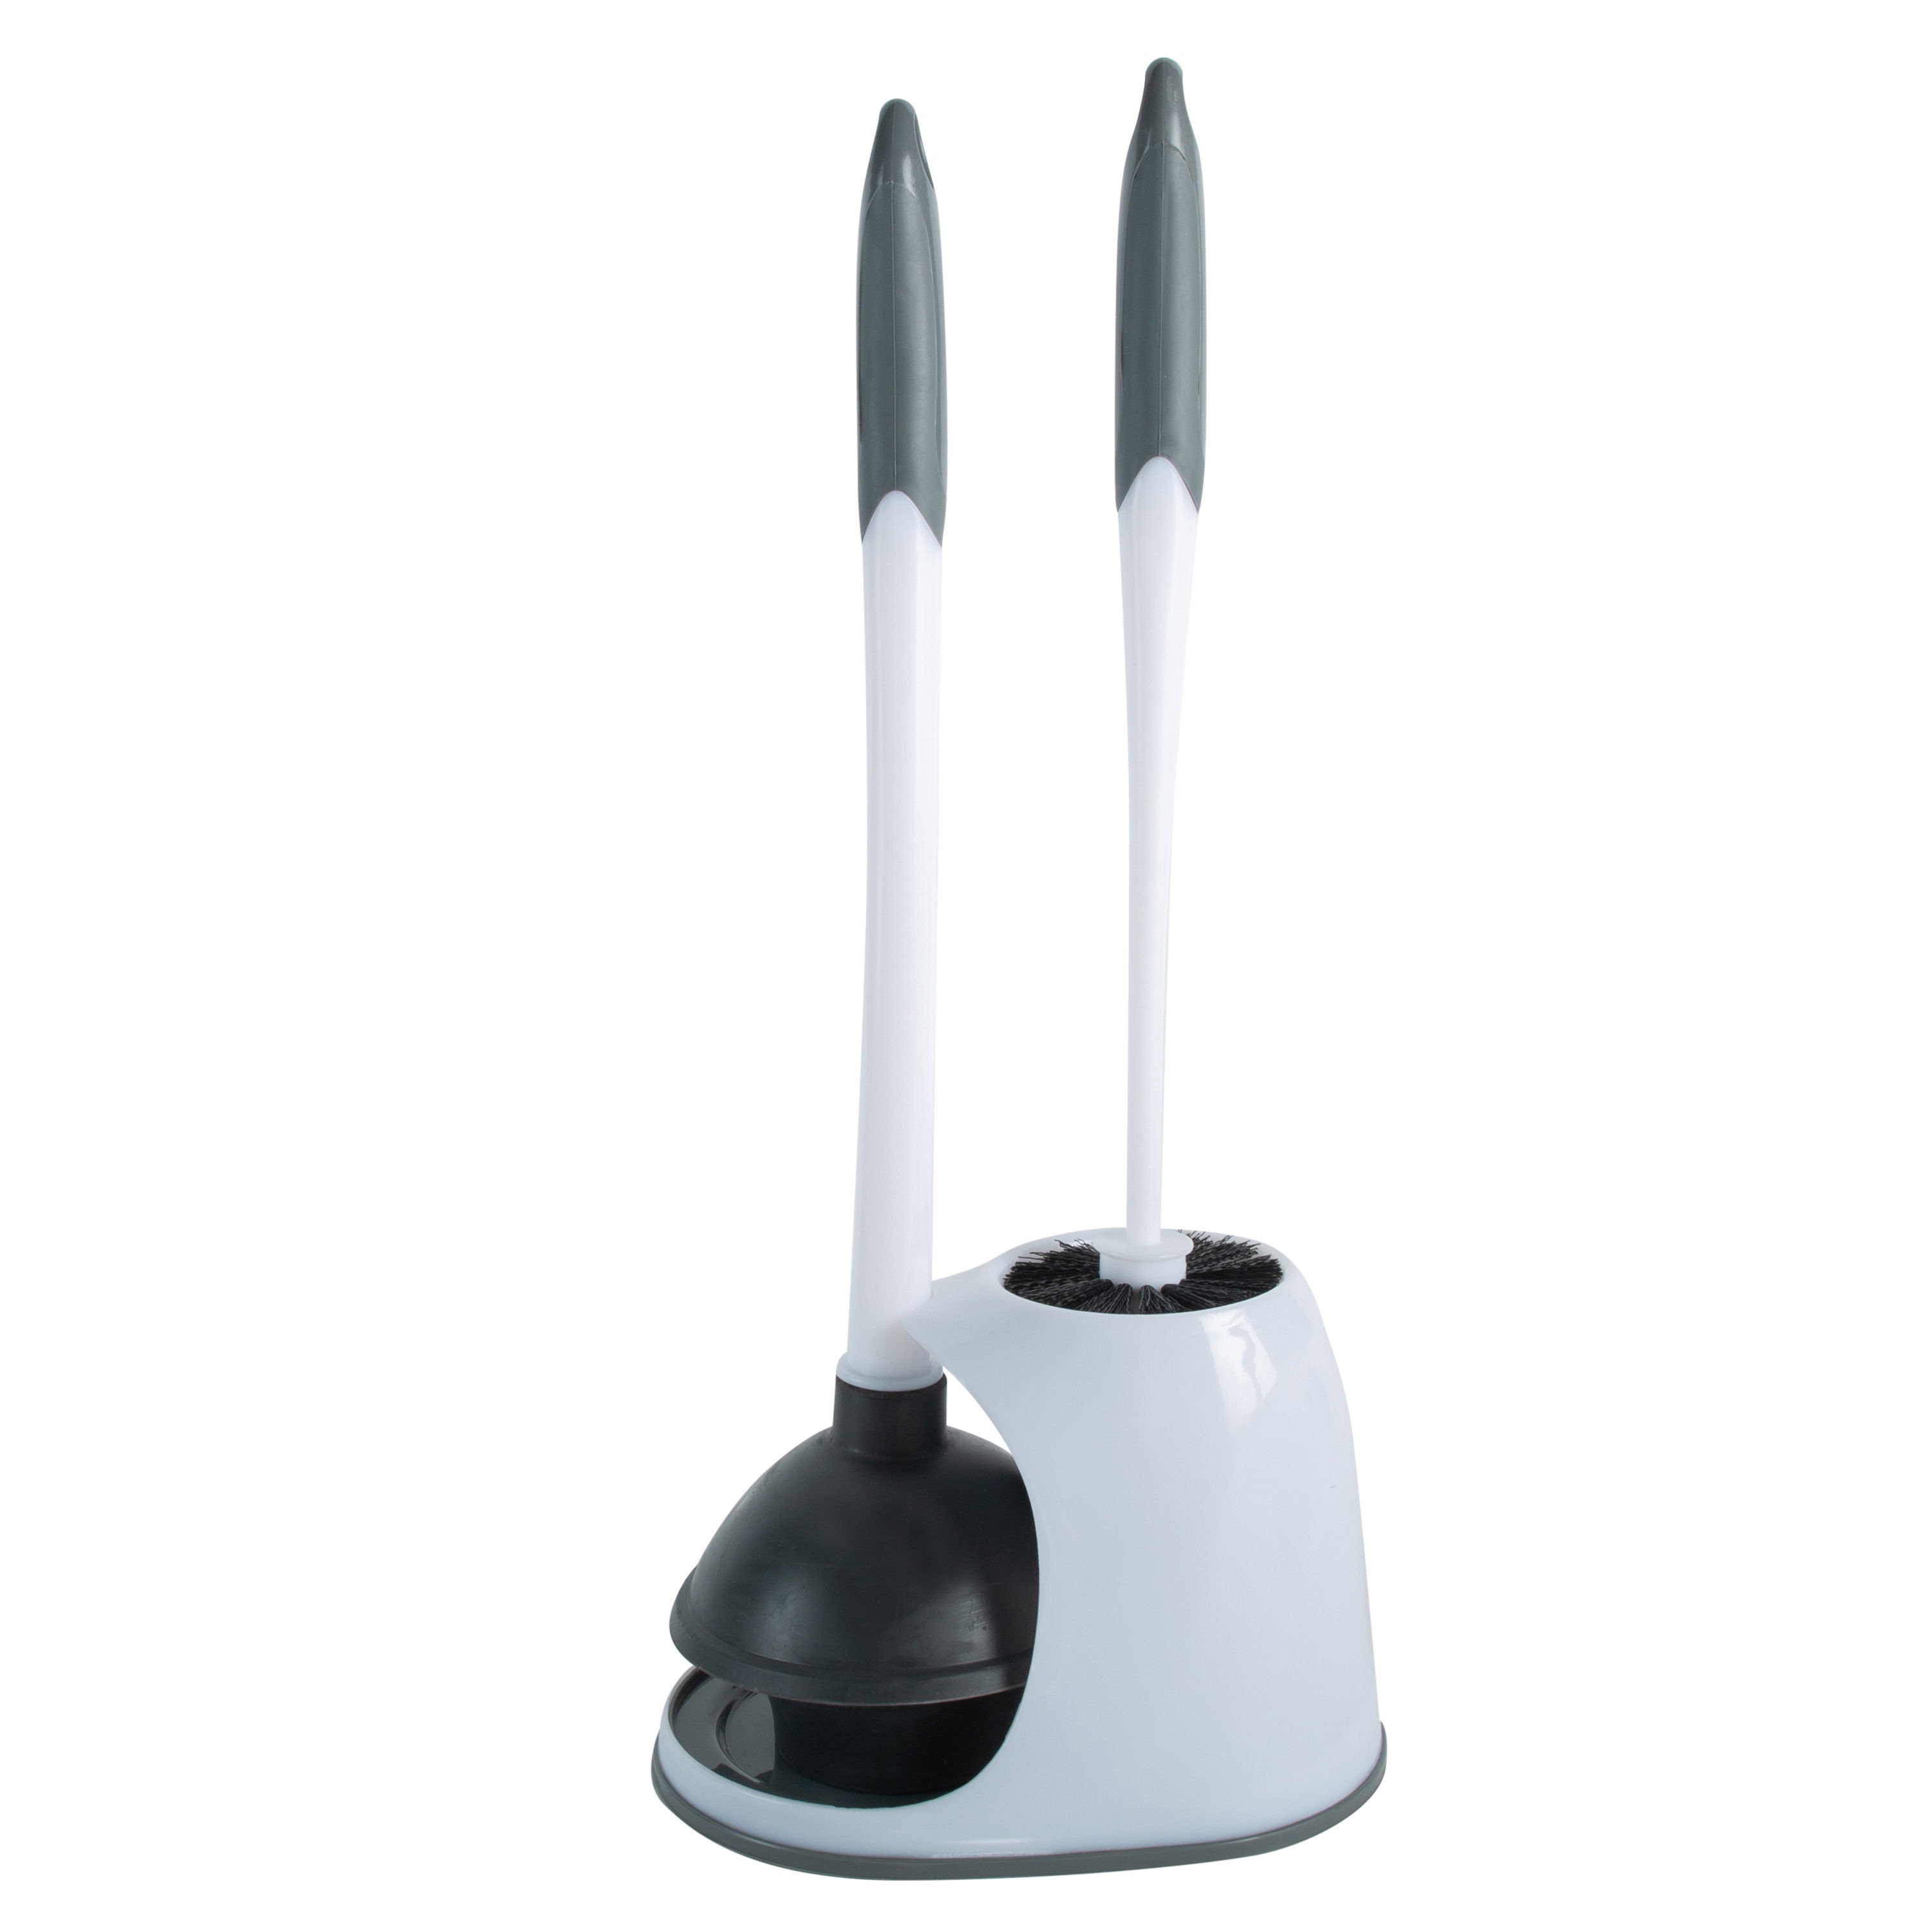 Plungers and Toilet Brushes Can Be Pretty! » This Little Miggy